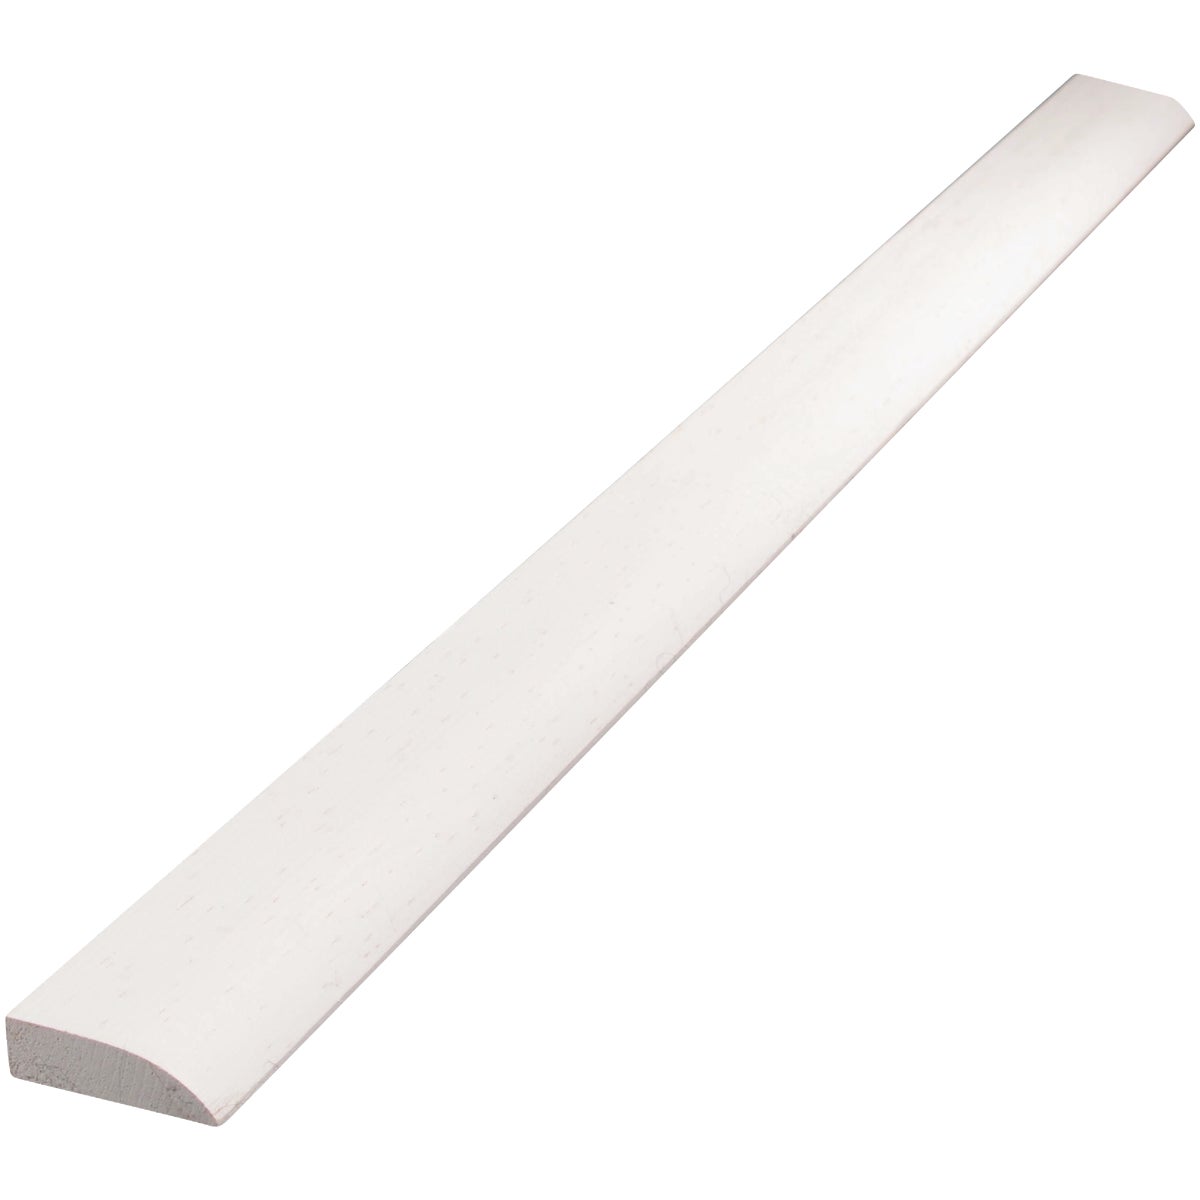 Alexandria Moulding 7/16 In. W. x 1-3/8 In. H. x 7 Ft. L. White Finger Joint Pine Ranch Stop Molding